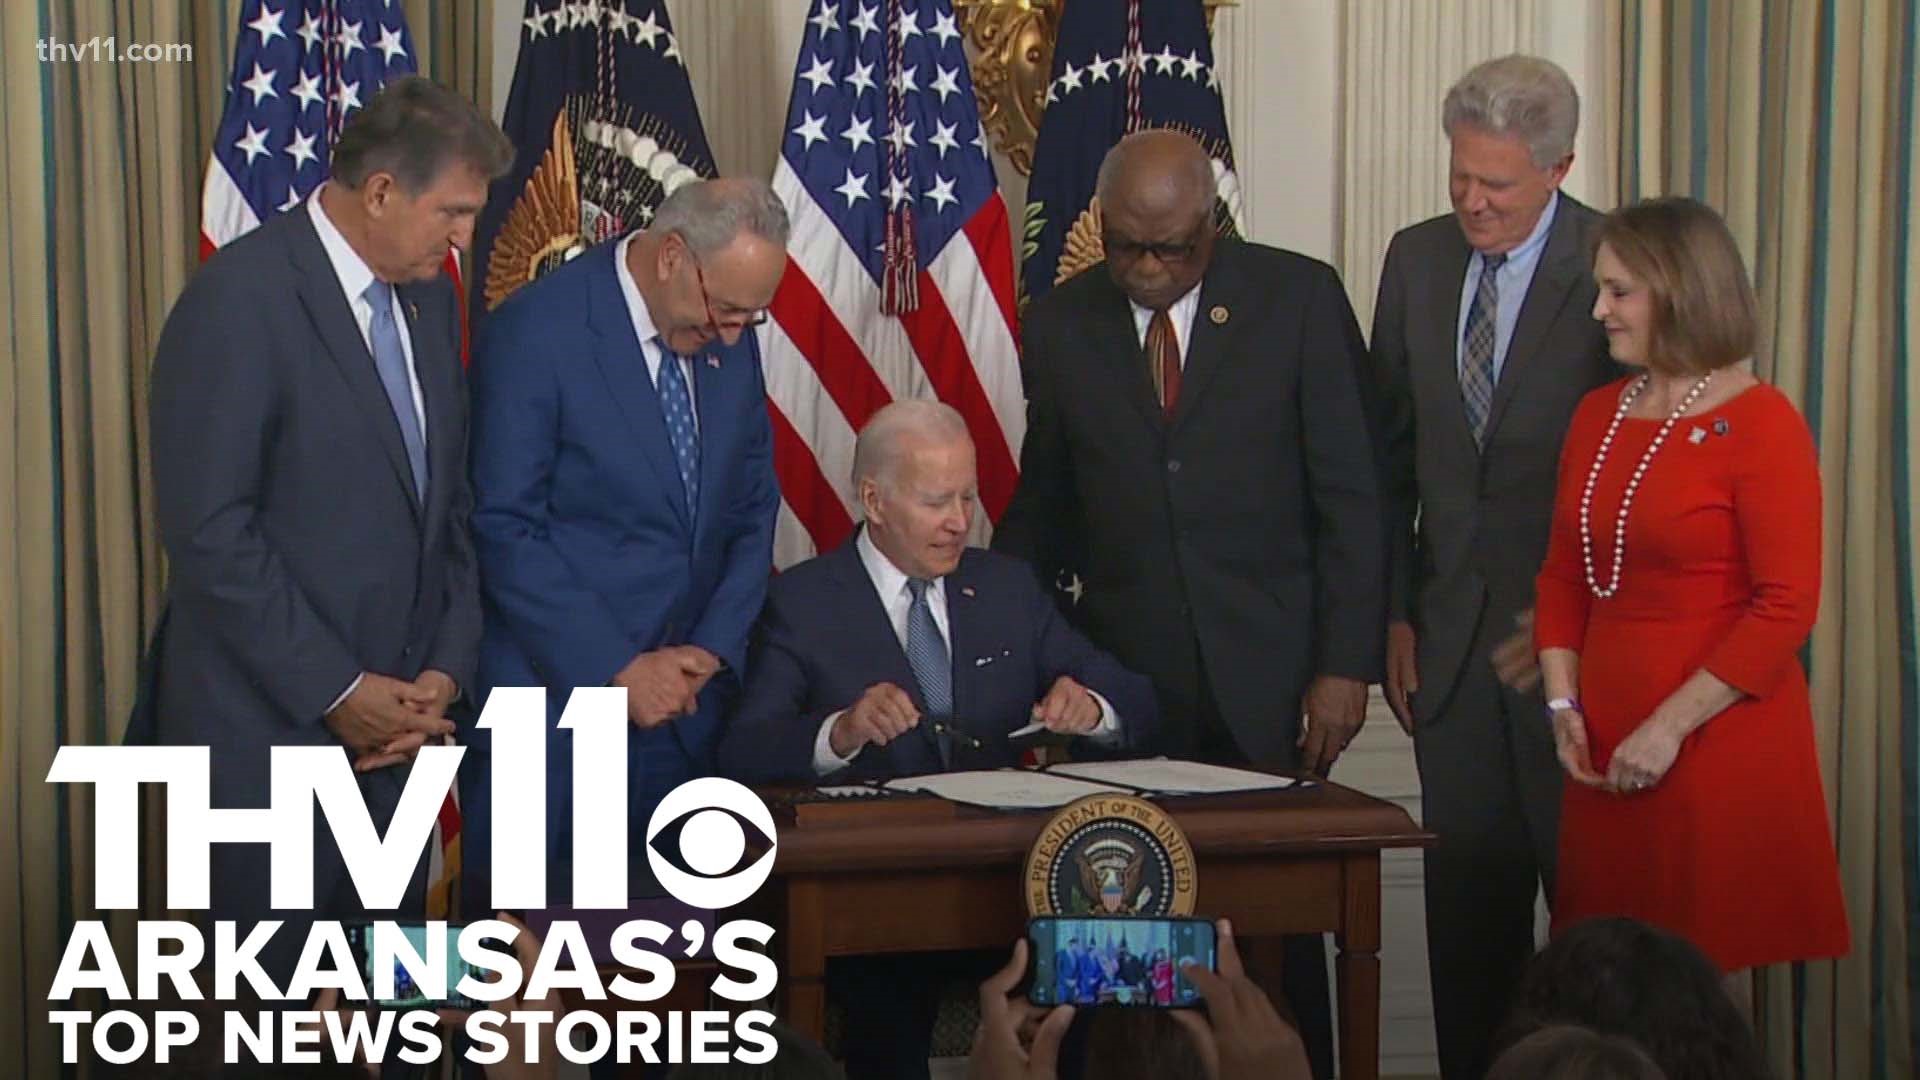 Mackailyn Johnson provides the top news stories for August 17, 2022 including Liz Cheney's loss in the primaries and Biden signing the Inflation Reduction Act.